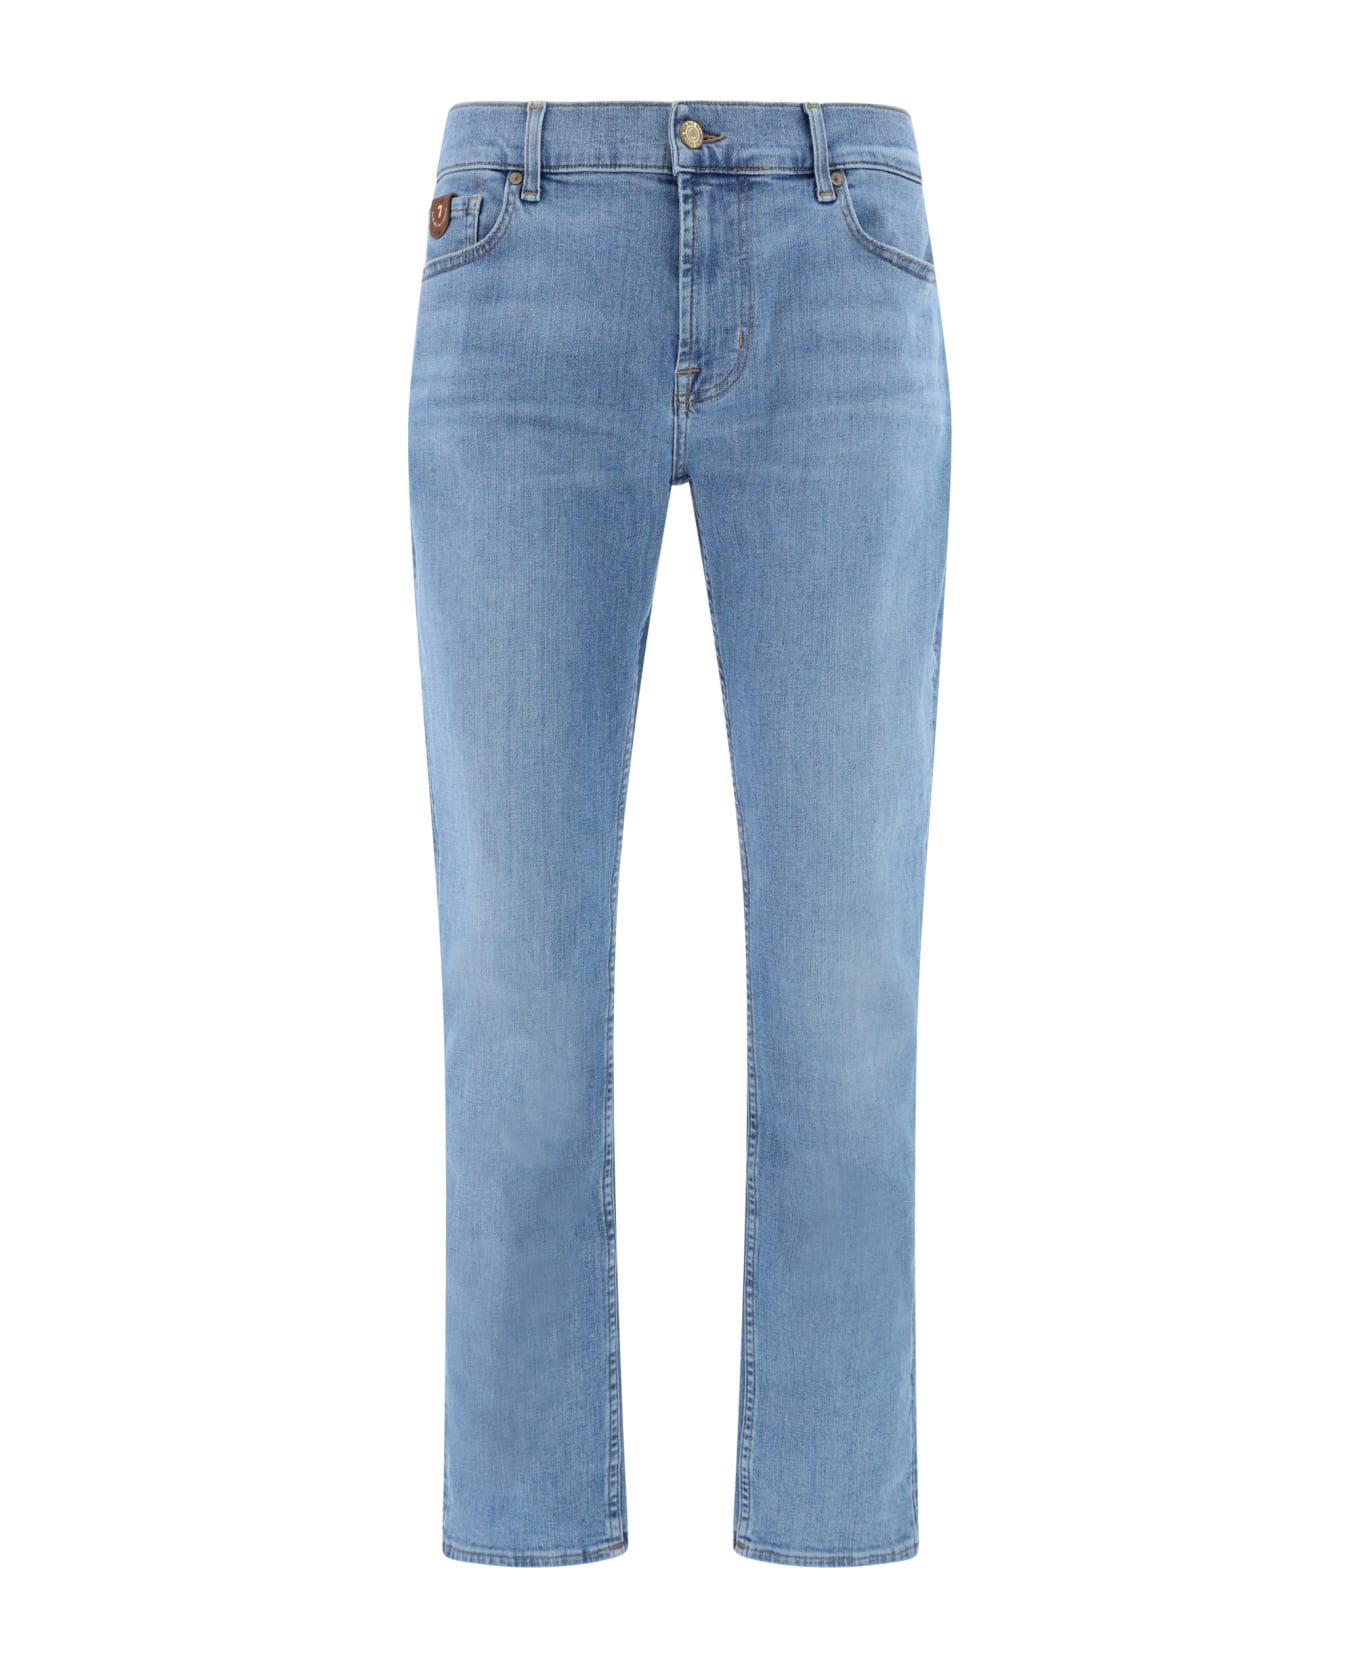 7 For All Mankind Jeans - Light Blue